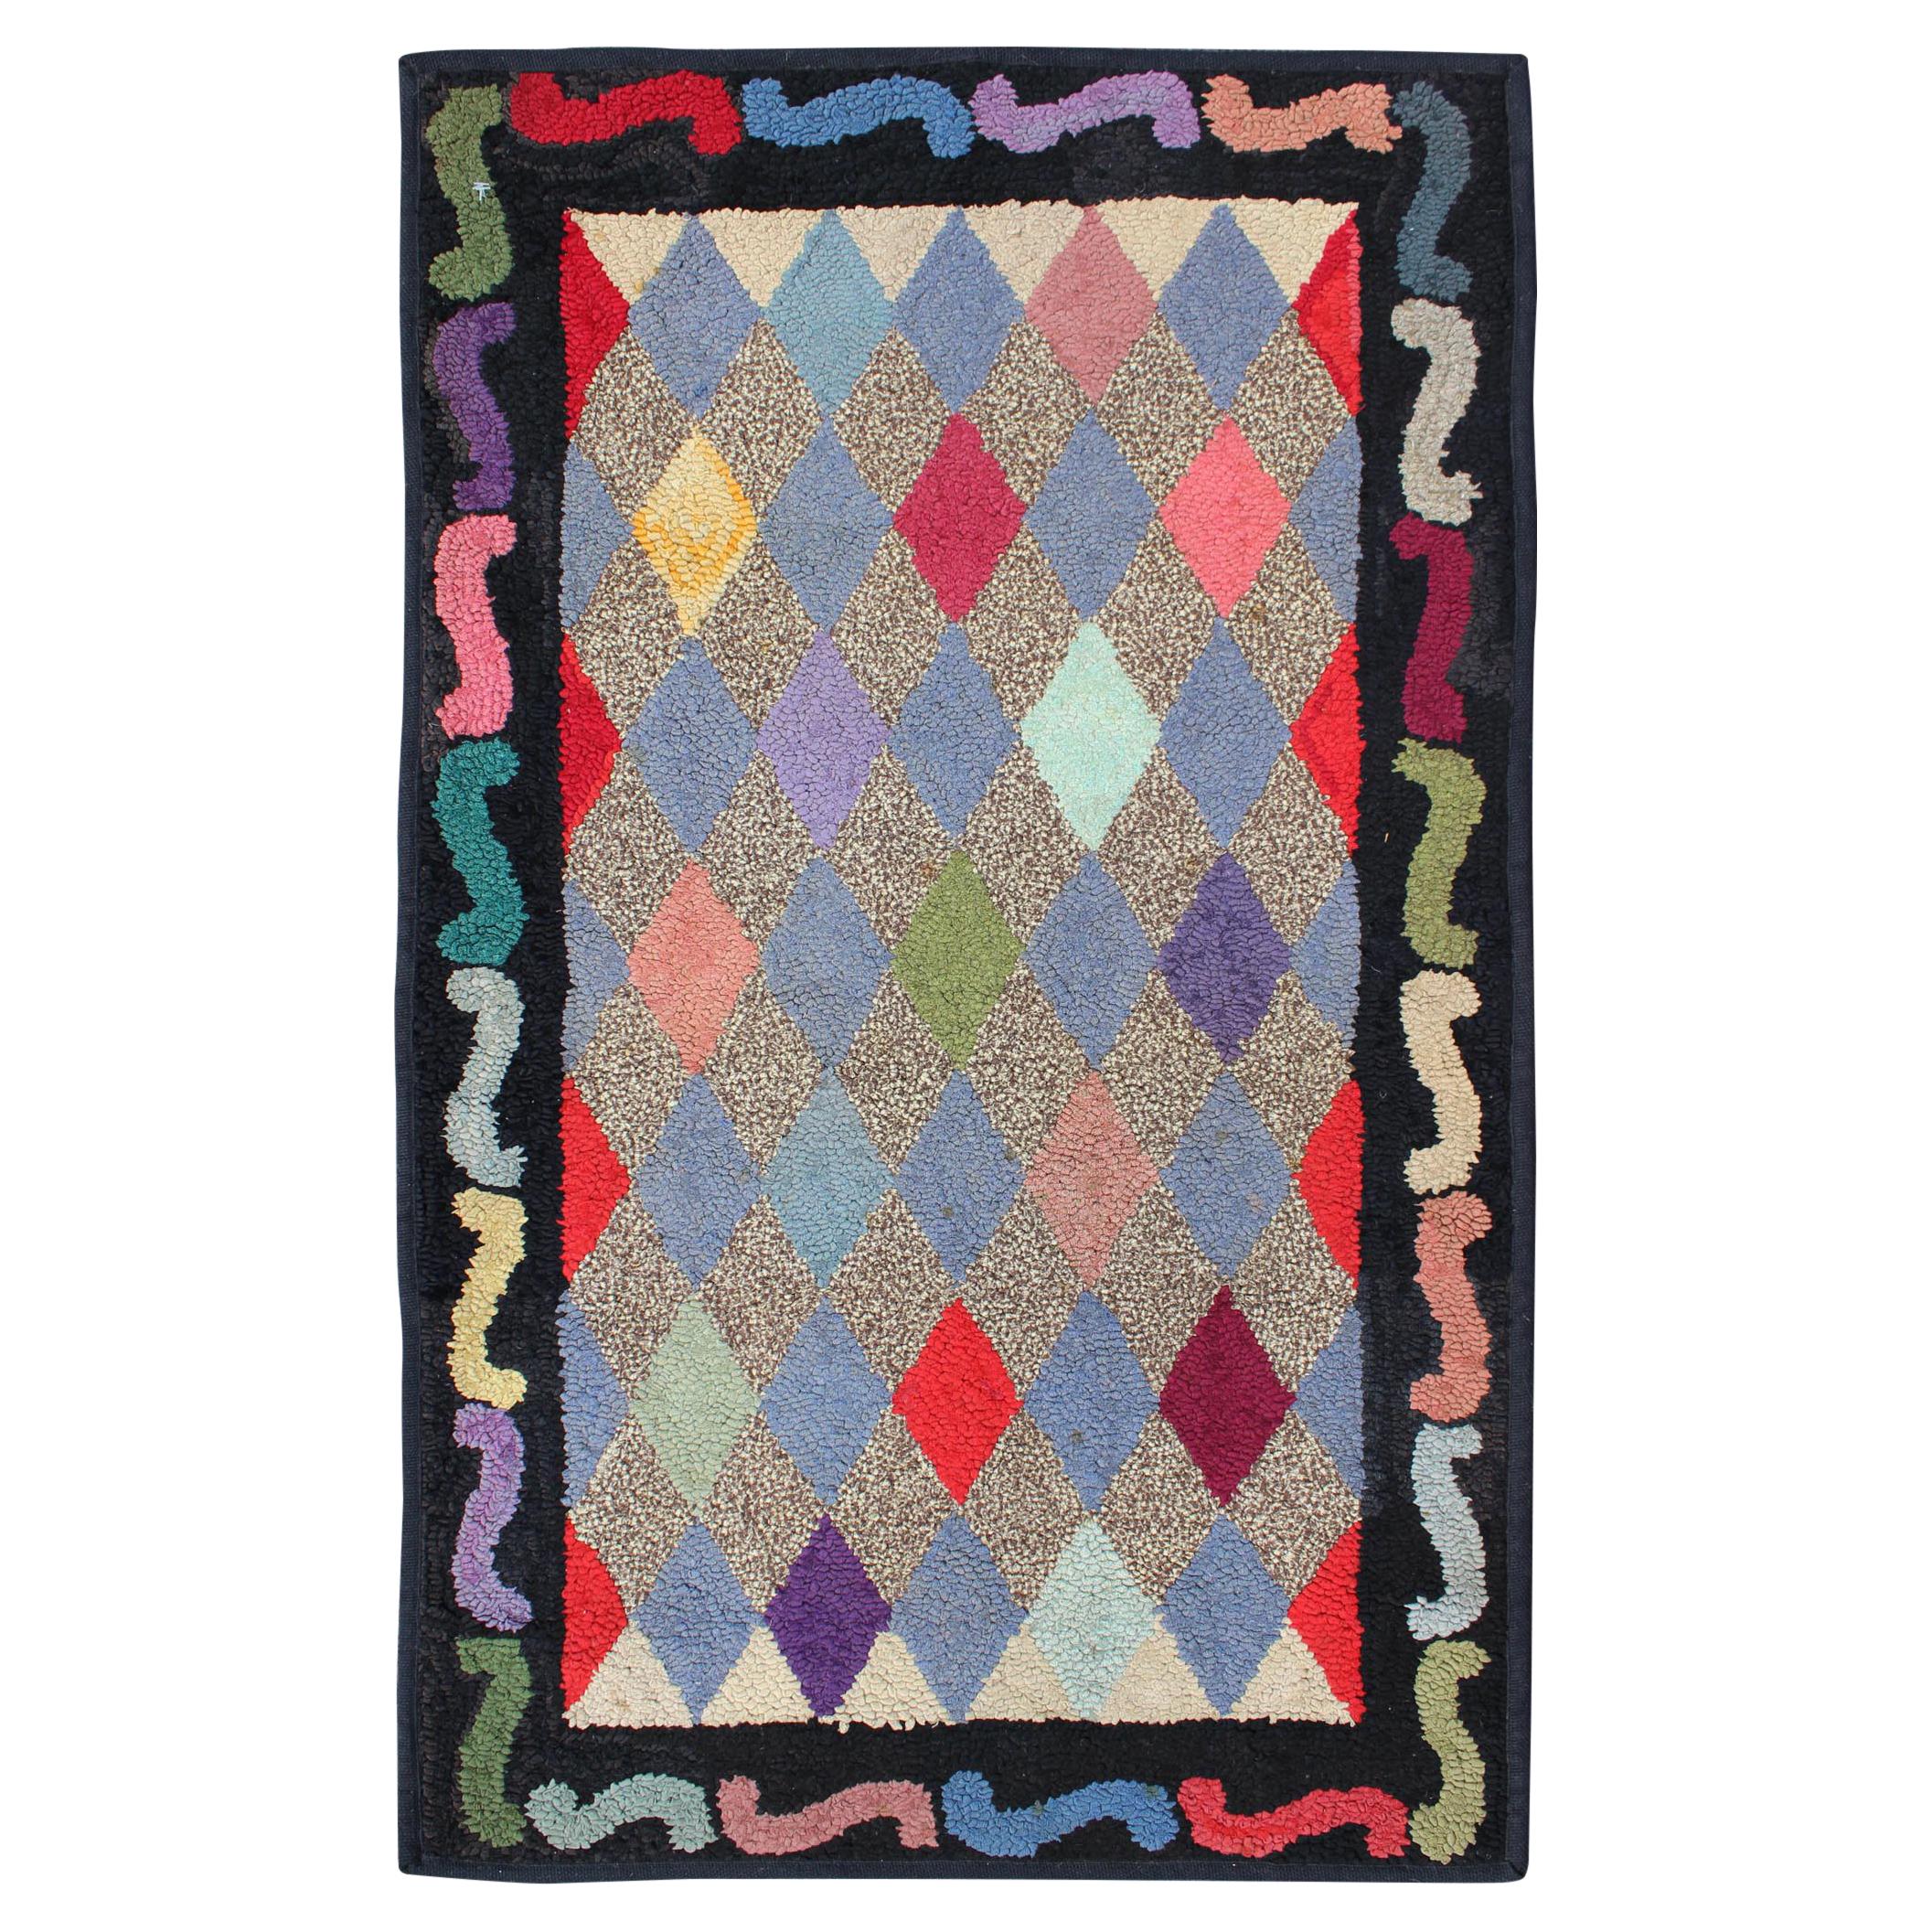 American Hooked Rug with Colorful All-Over Diamond Design with Charcoal Border For Sale